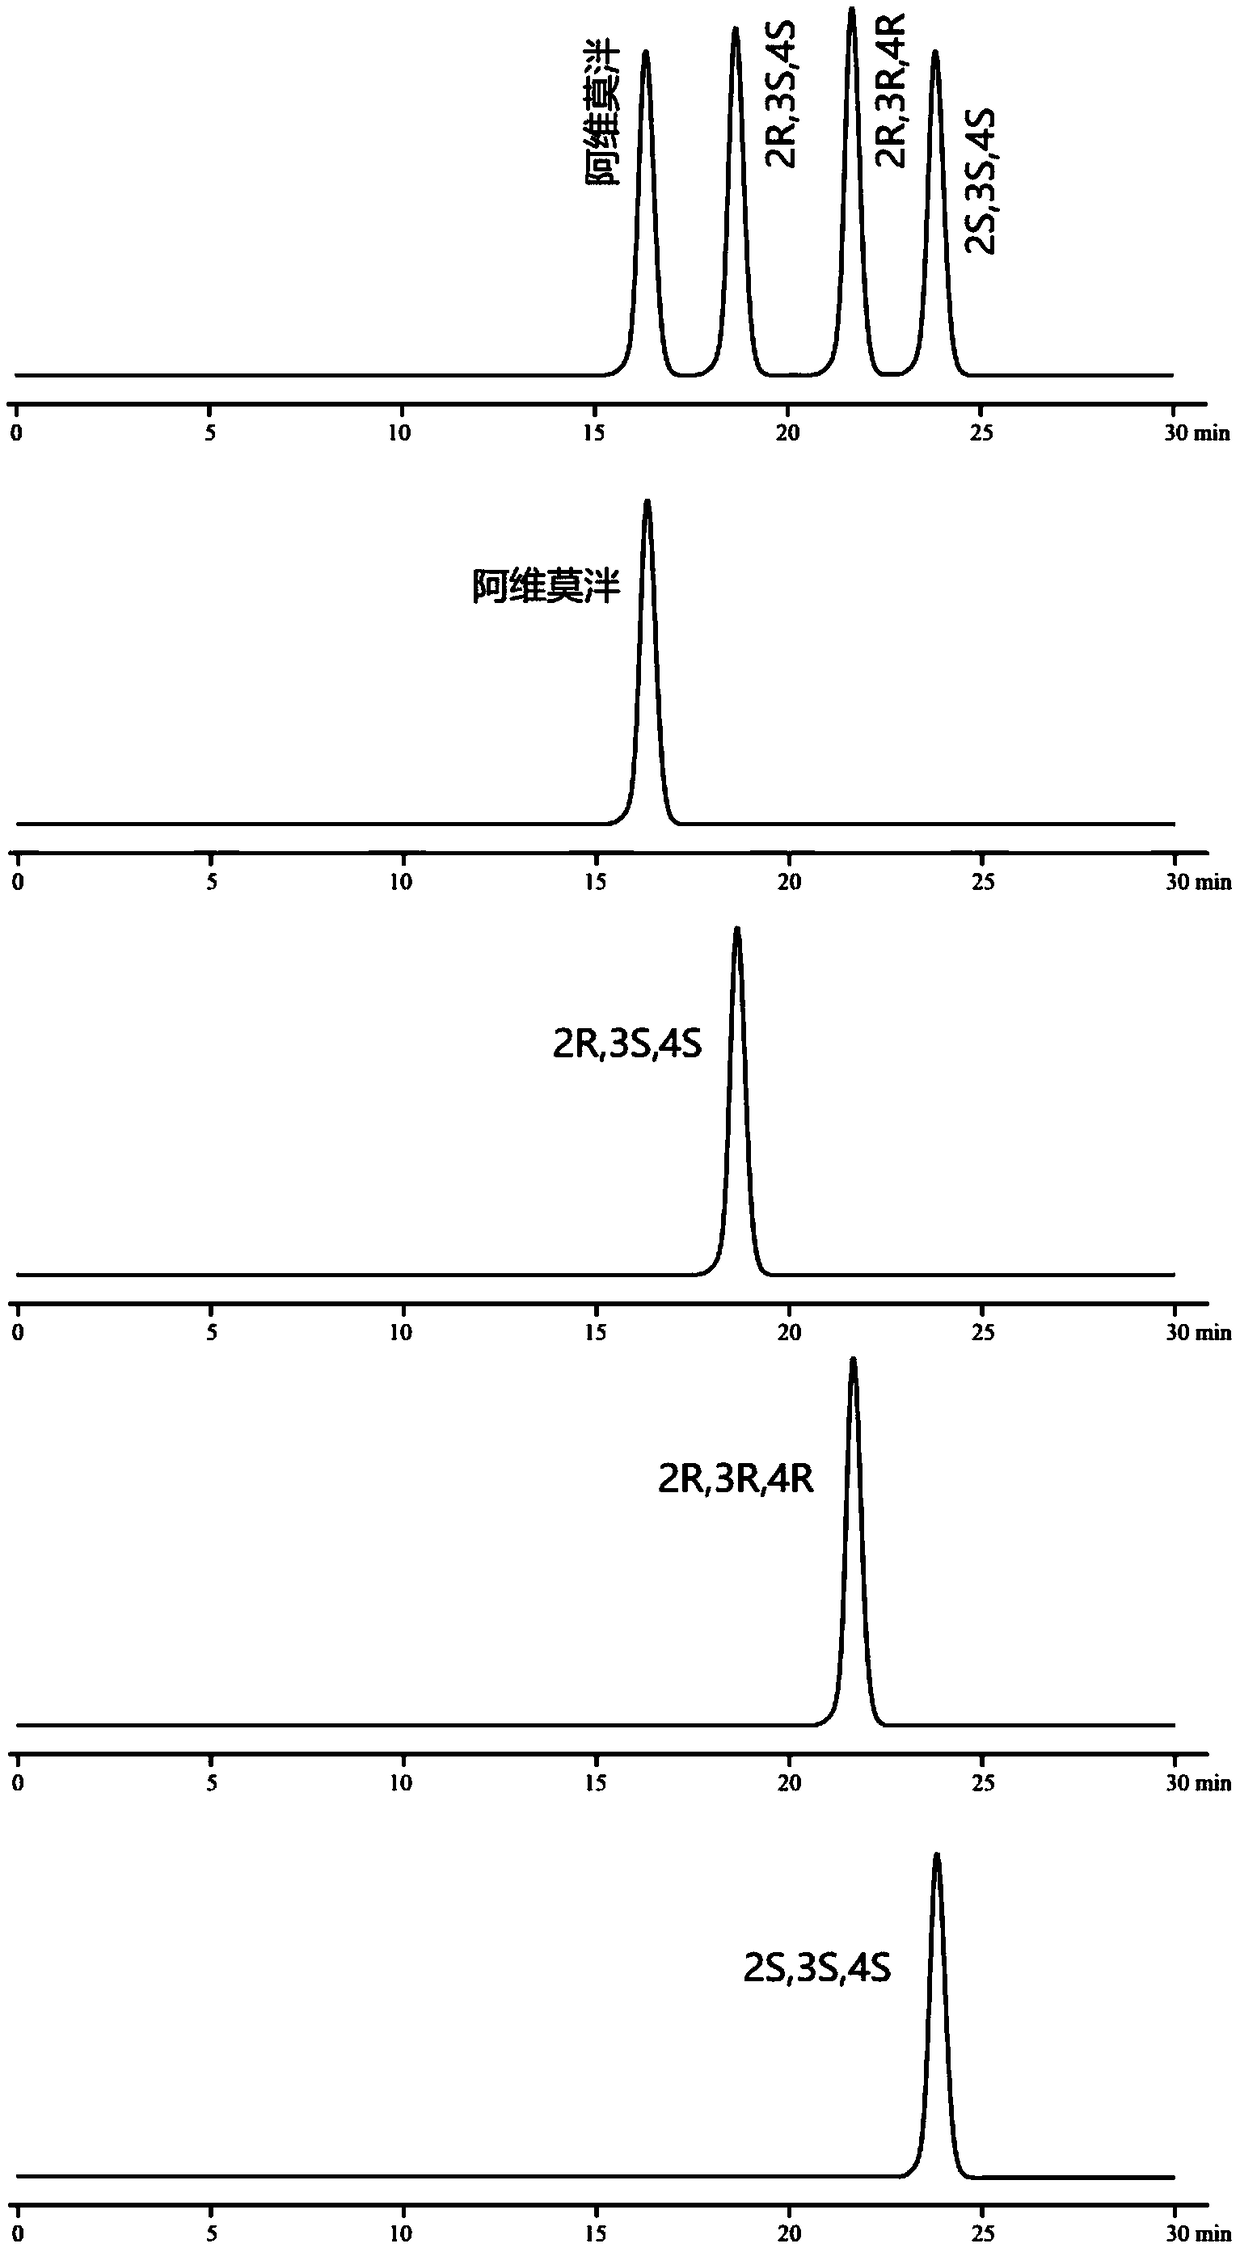 HPLC method for separating alvimopan and optical isomers thereof